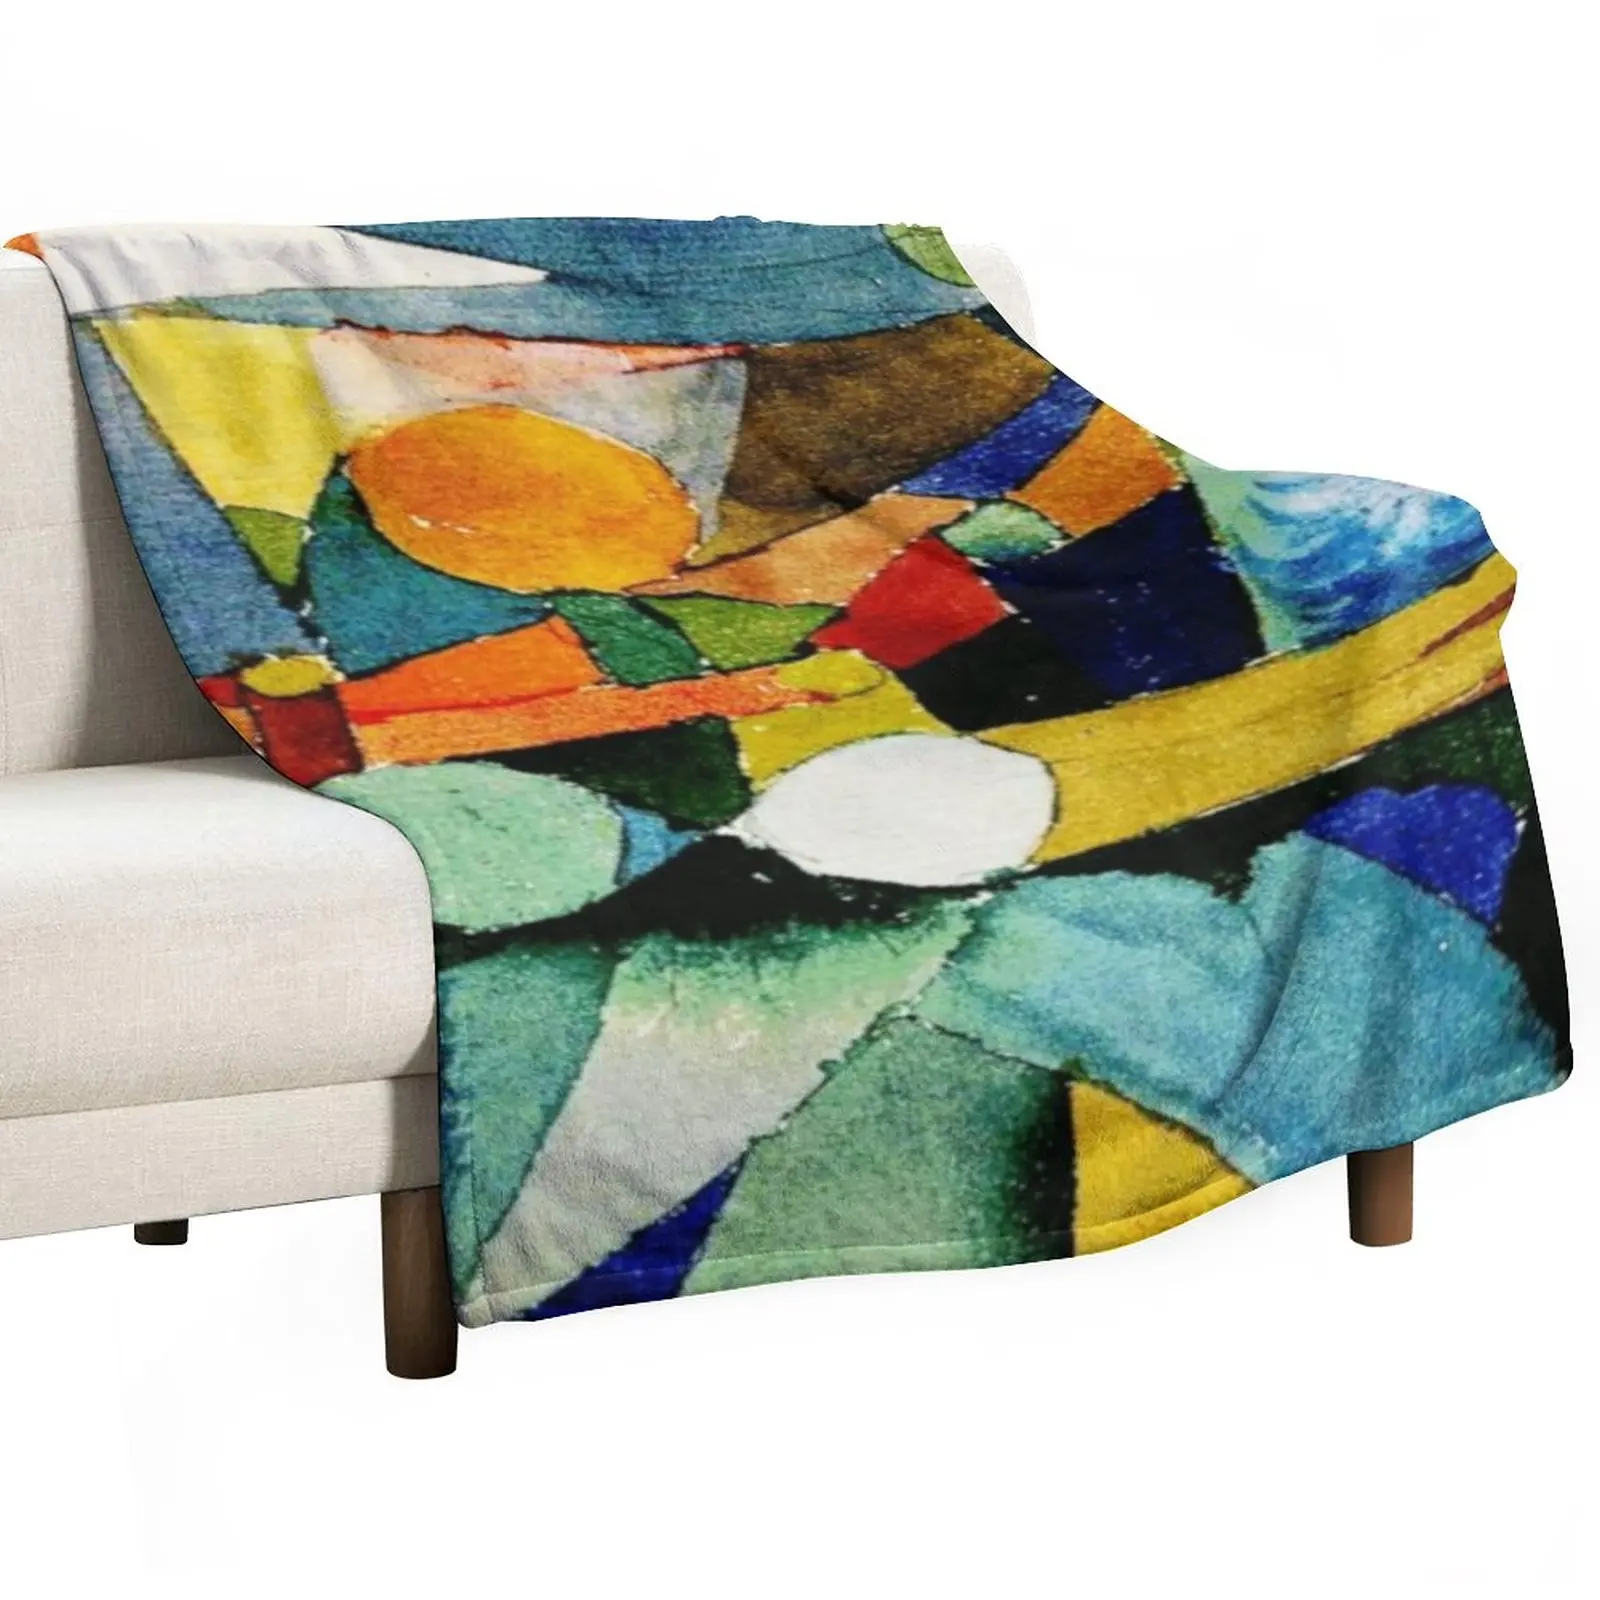 

Colour Shapes | Paul Klee Abstract Watercolor Art Throw Blanket Soft Plush Plaid Nap Blanket